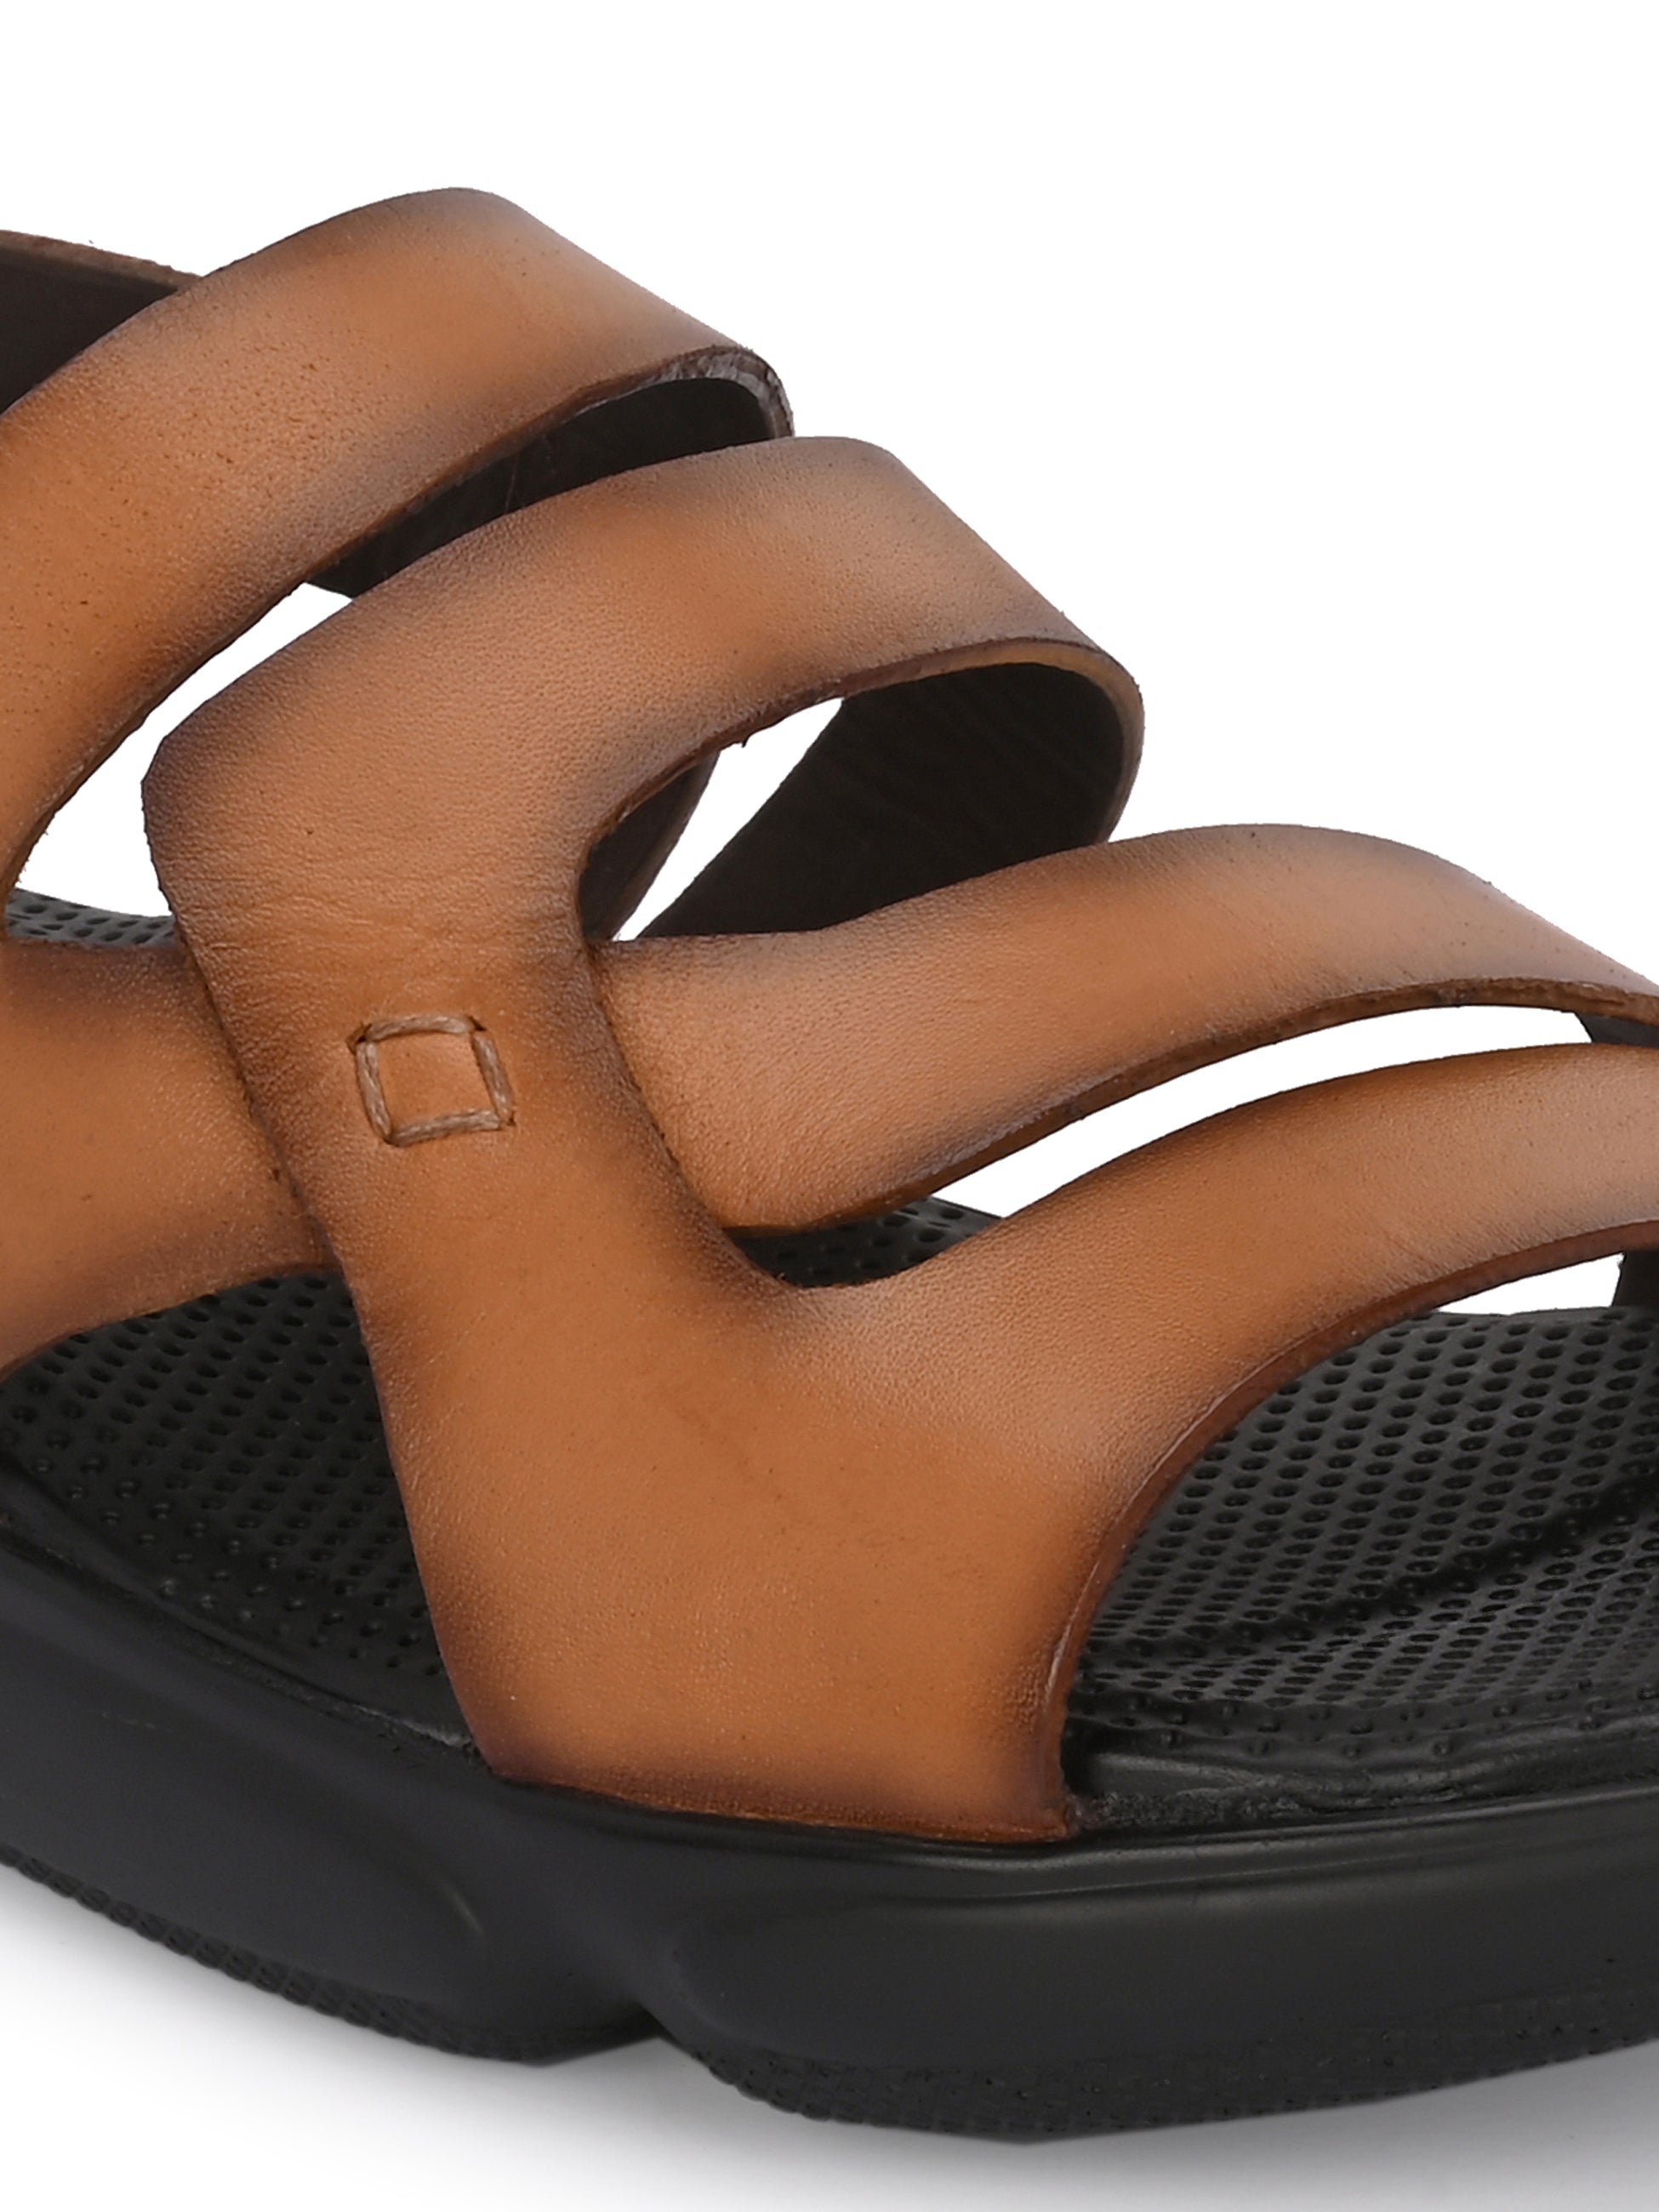 VJH confort Comfortable sandals for Women's, Slip-on Low India | Ubuy